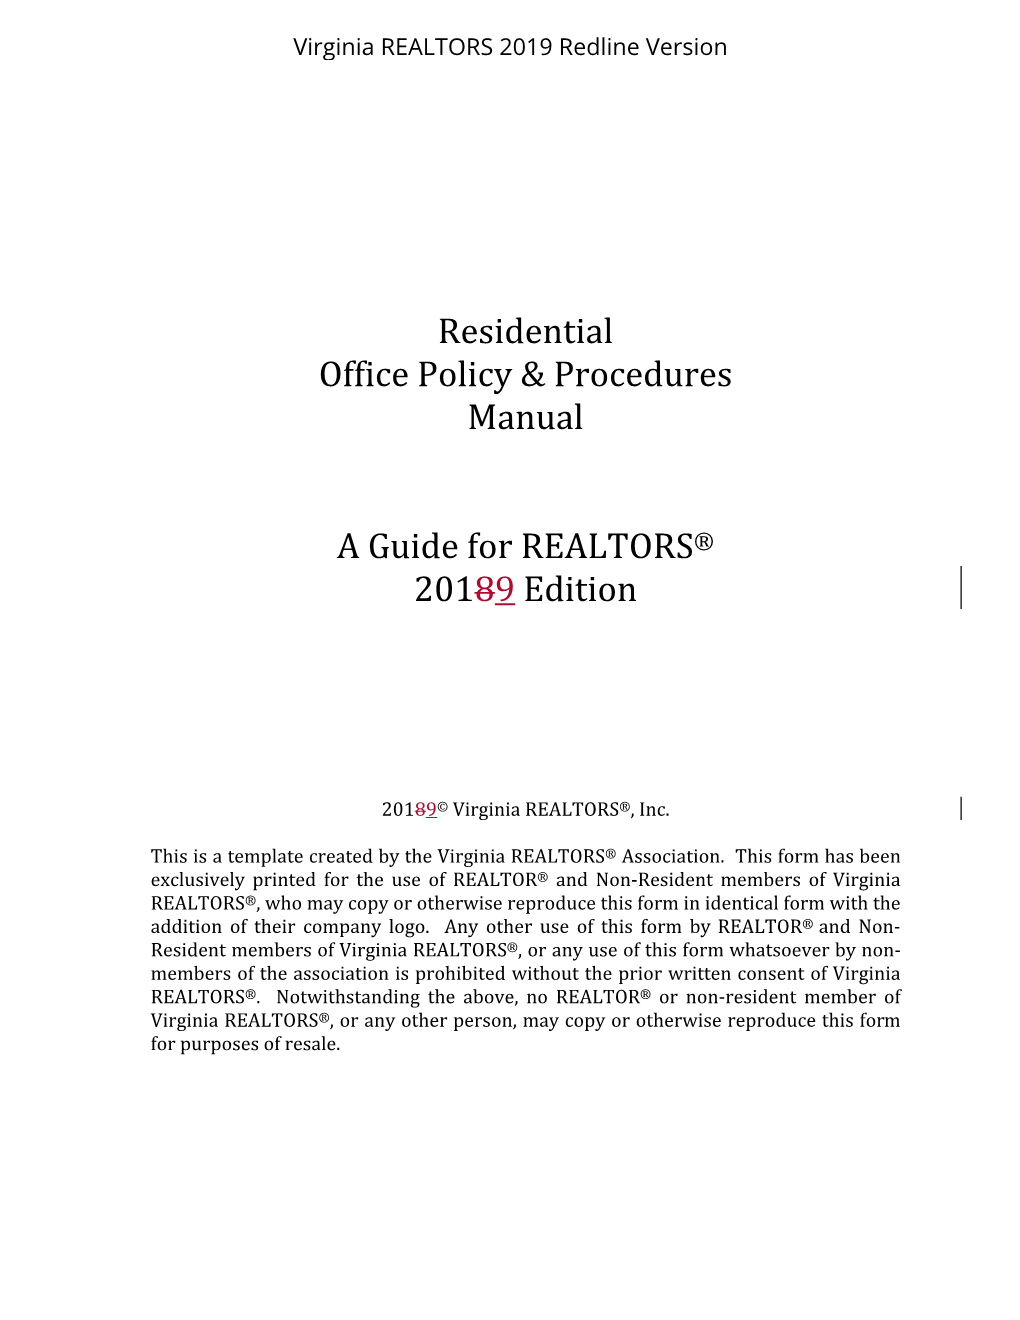 Broker Office Policy Manual 2019